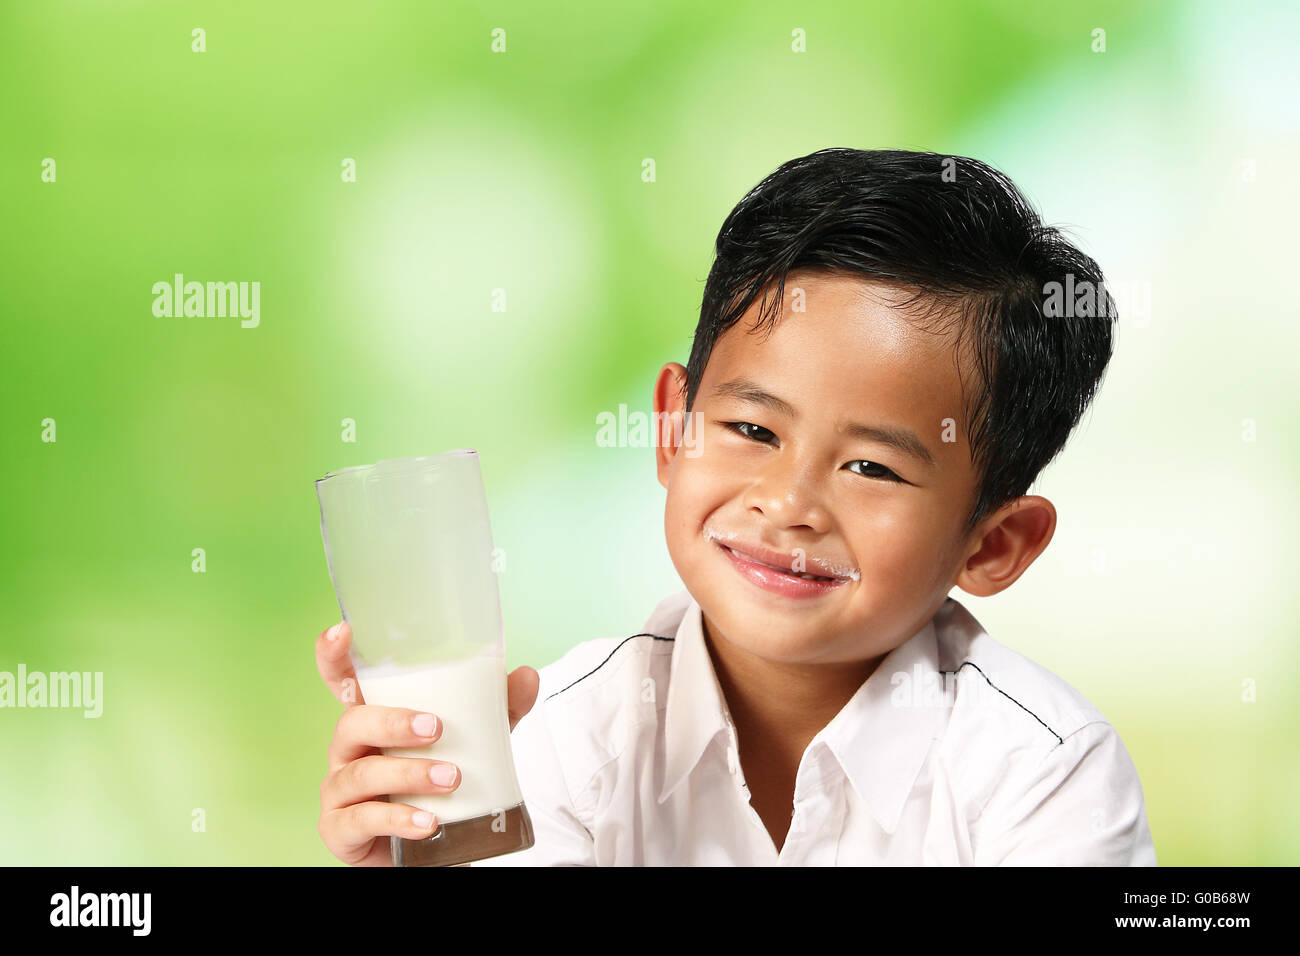 Young Asian boy smiling and holding a glass of milk over green blur background Stock Photo